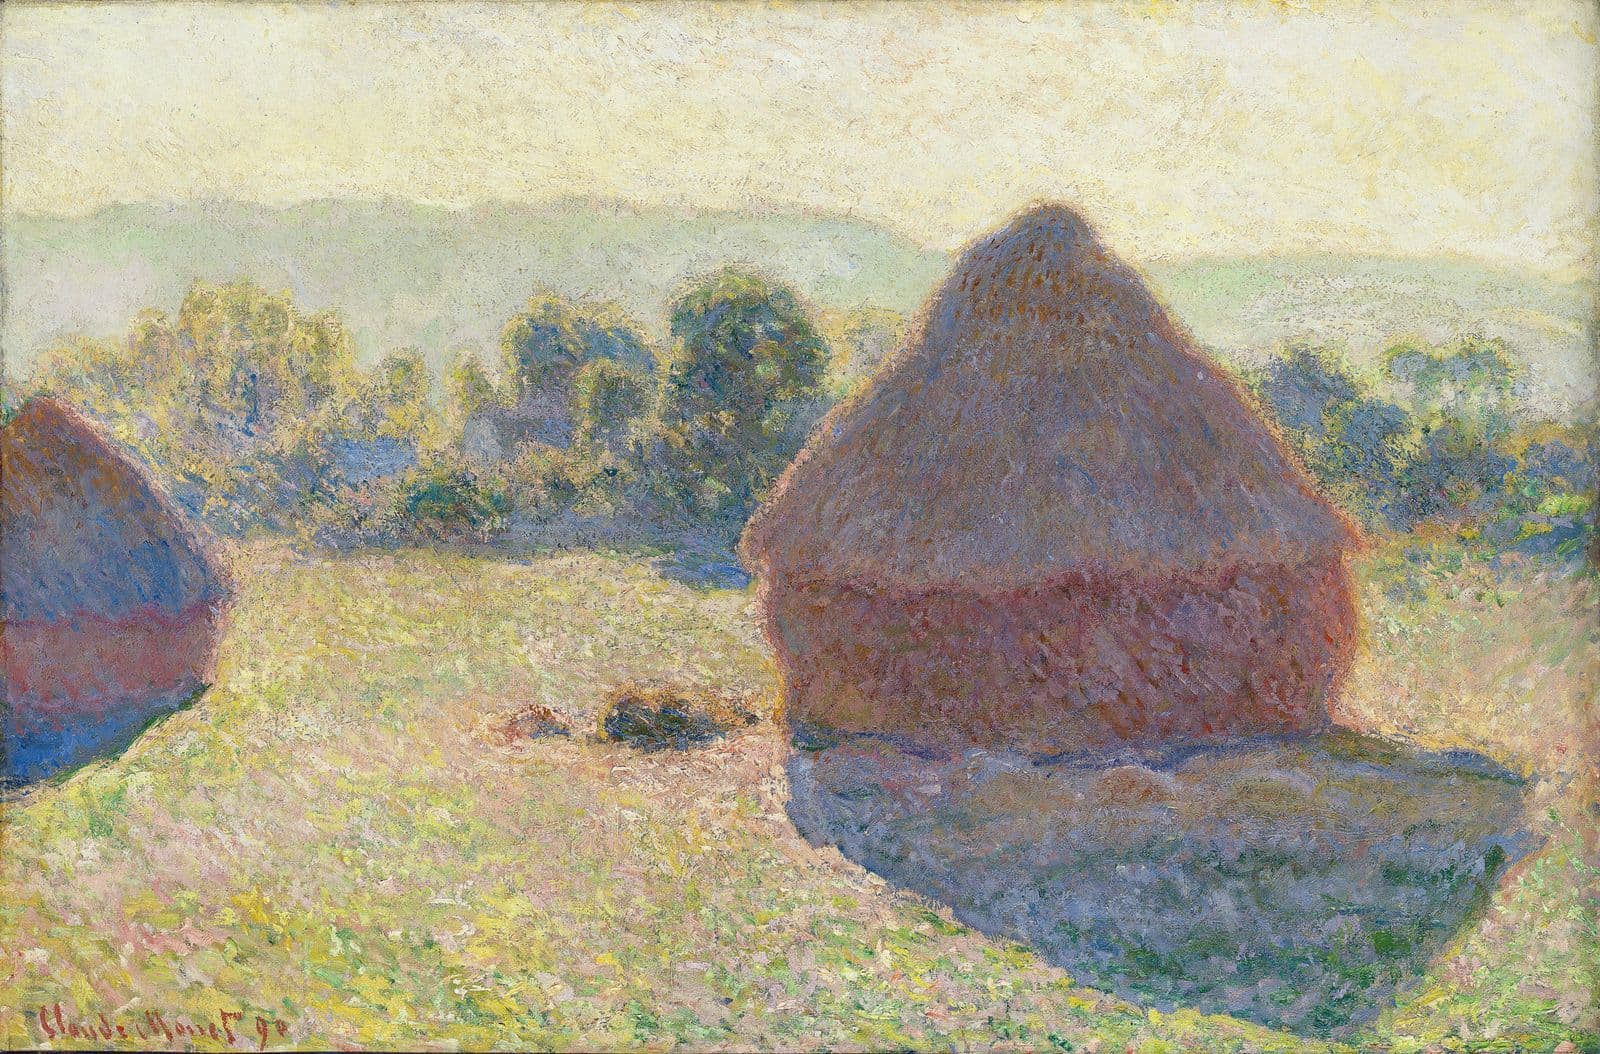 Impressionist painting of haystacks in a field with trees in the background